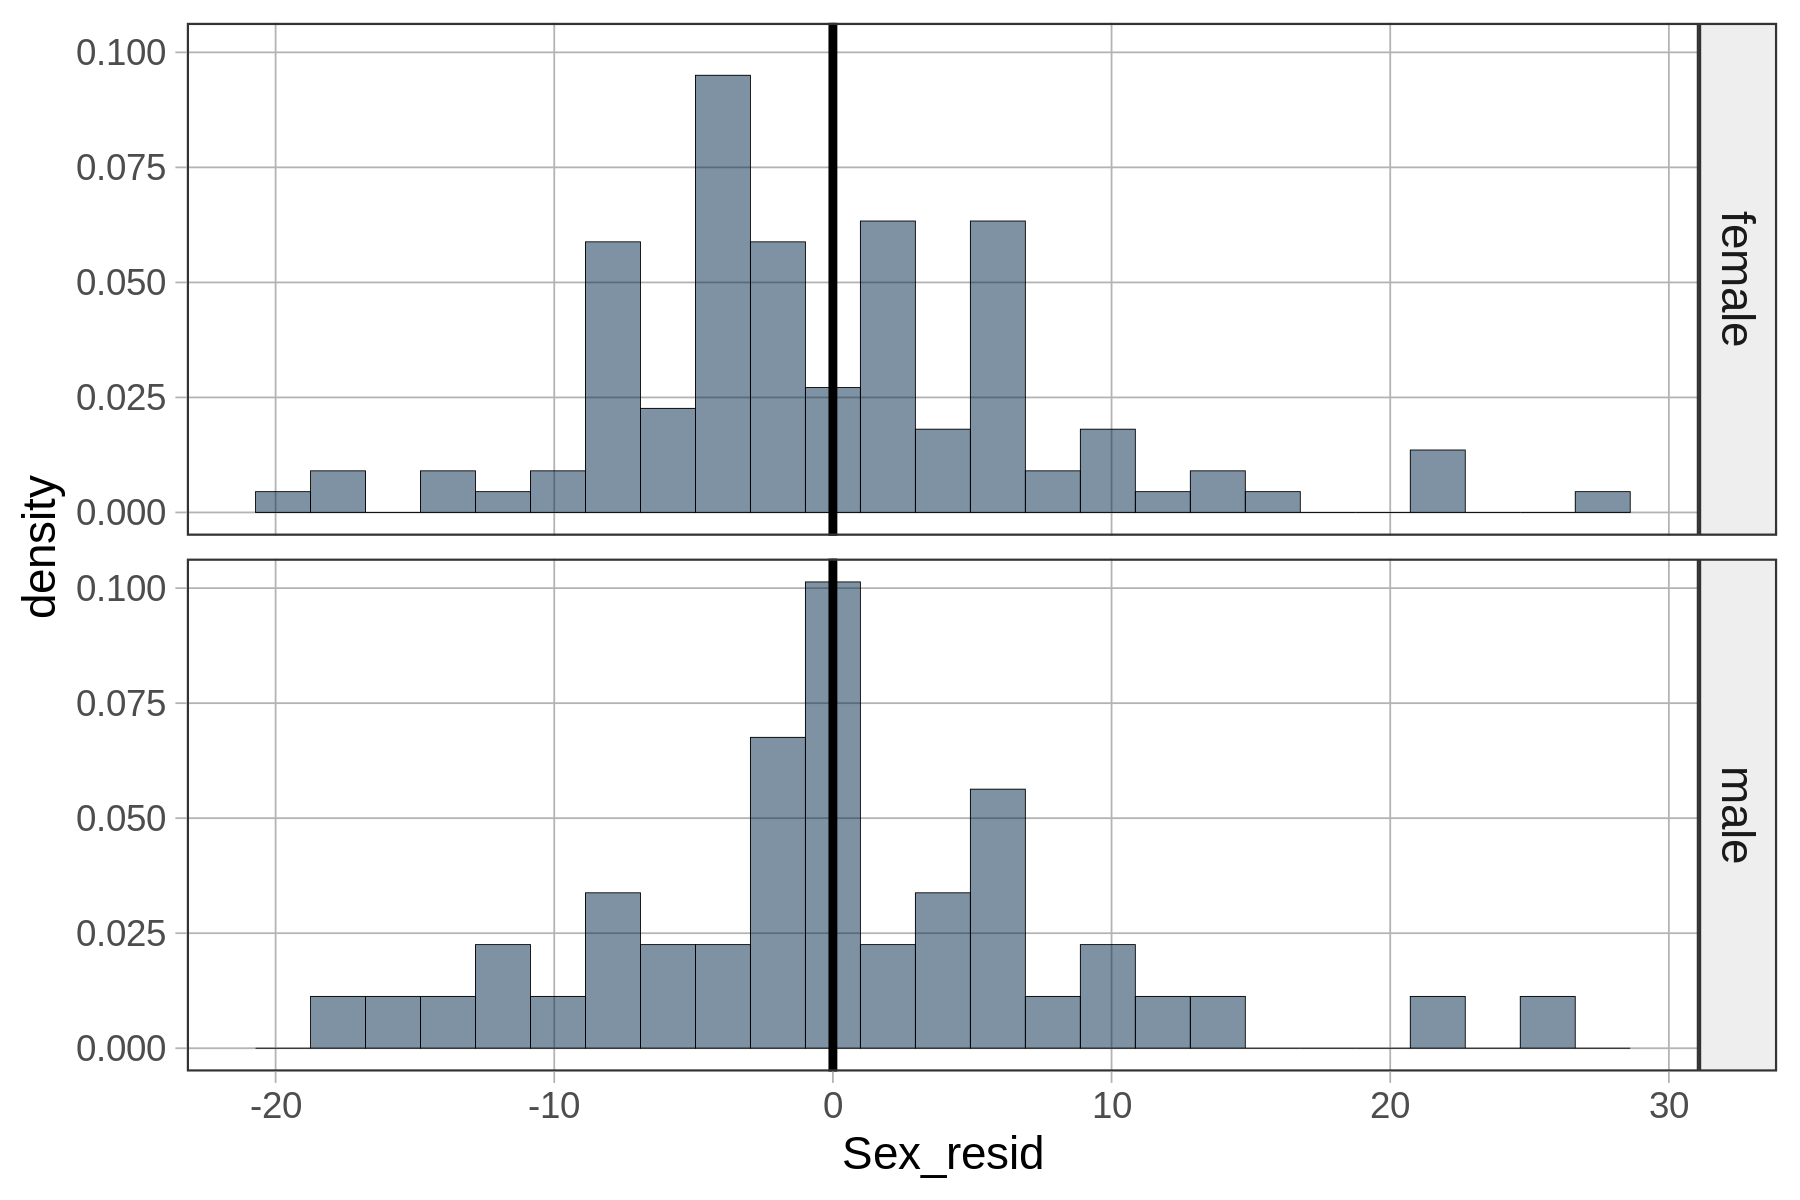 A faceted histogram of the distribution of Sex_resid by Sex on the right with vertical lines showing the mean for each Sex_resid group. The means for both the male group and the female group are 0.